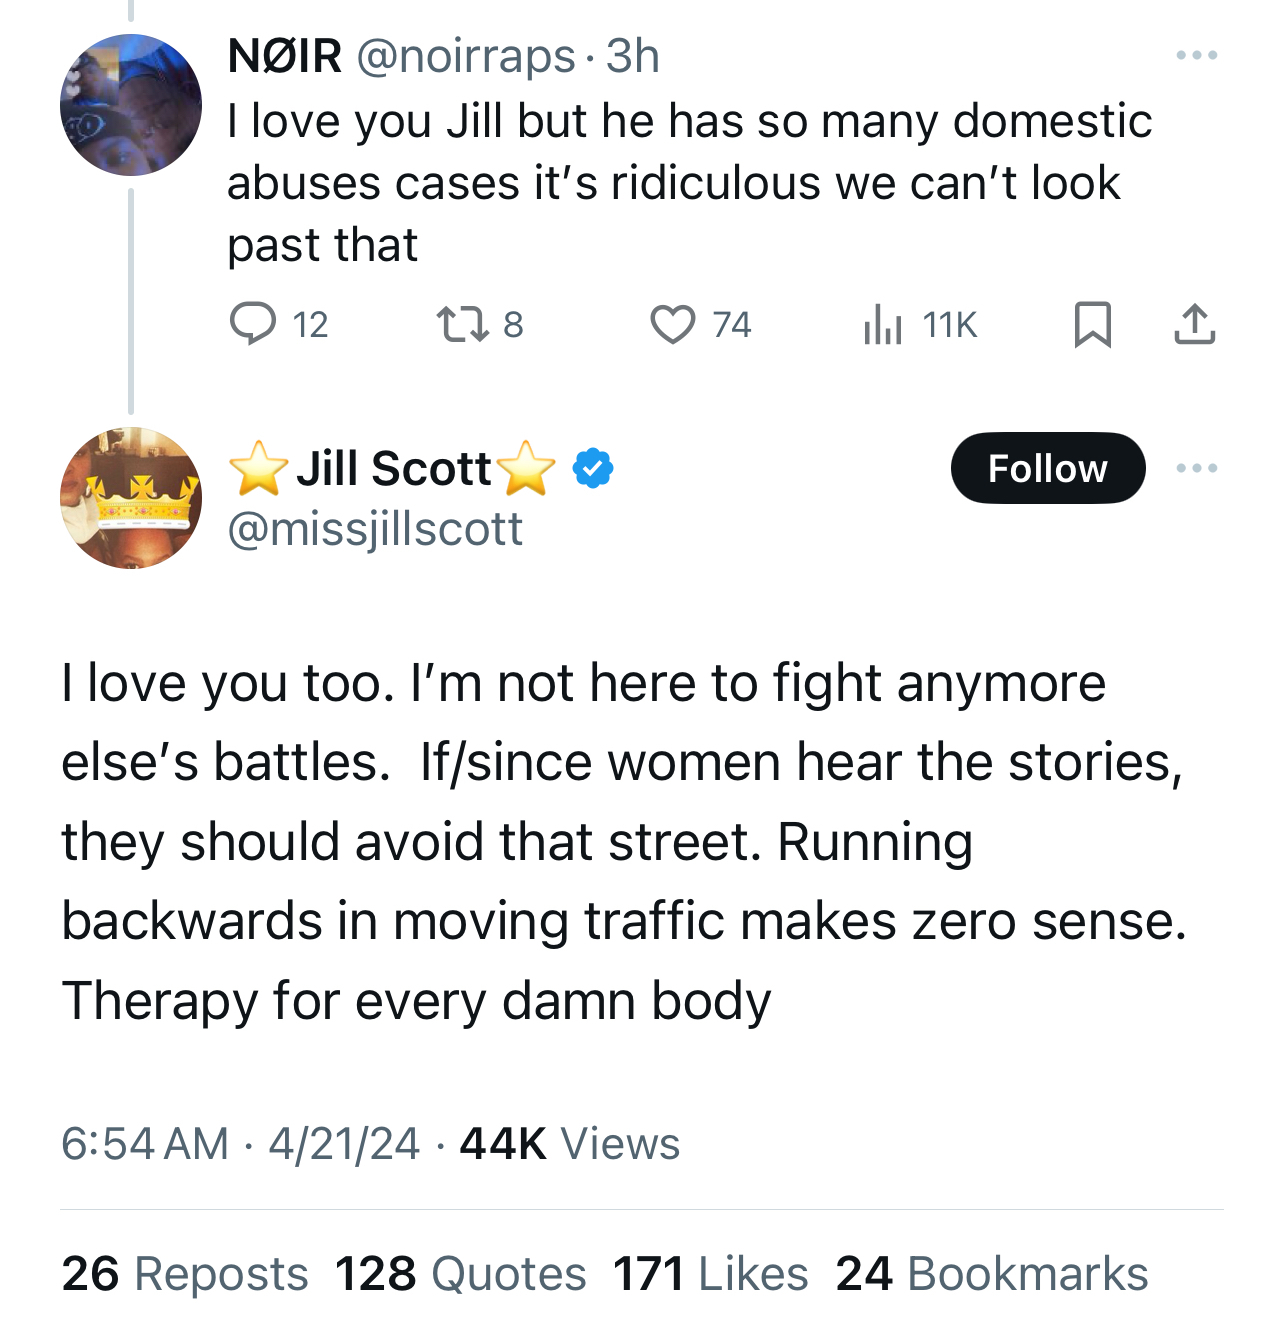 Twitter exchange between NOIR and Jill Scott discussing domestic abuse awareness and support